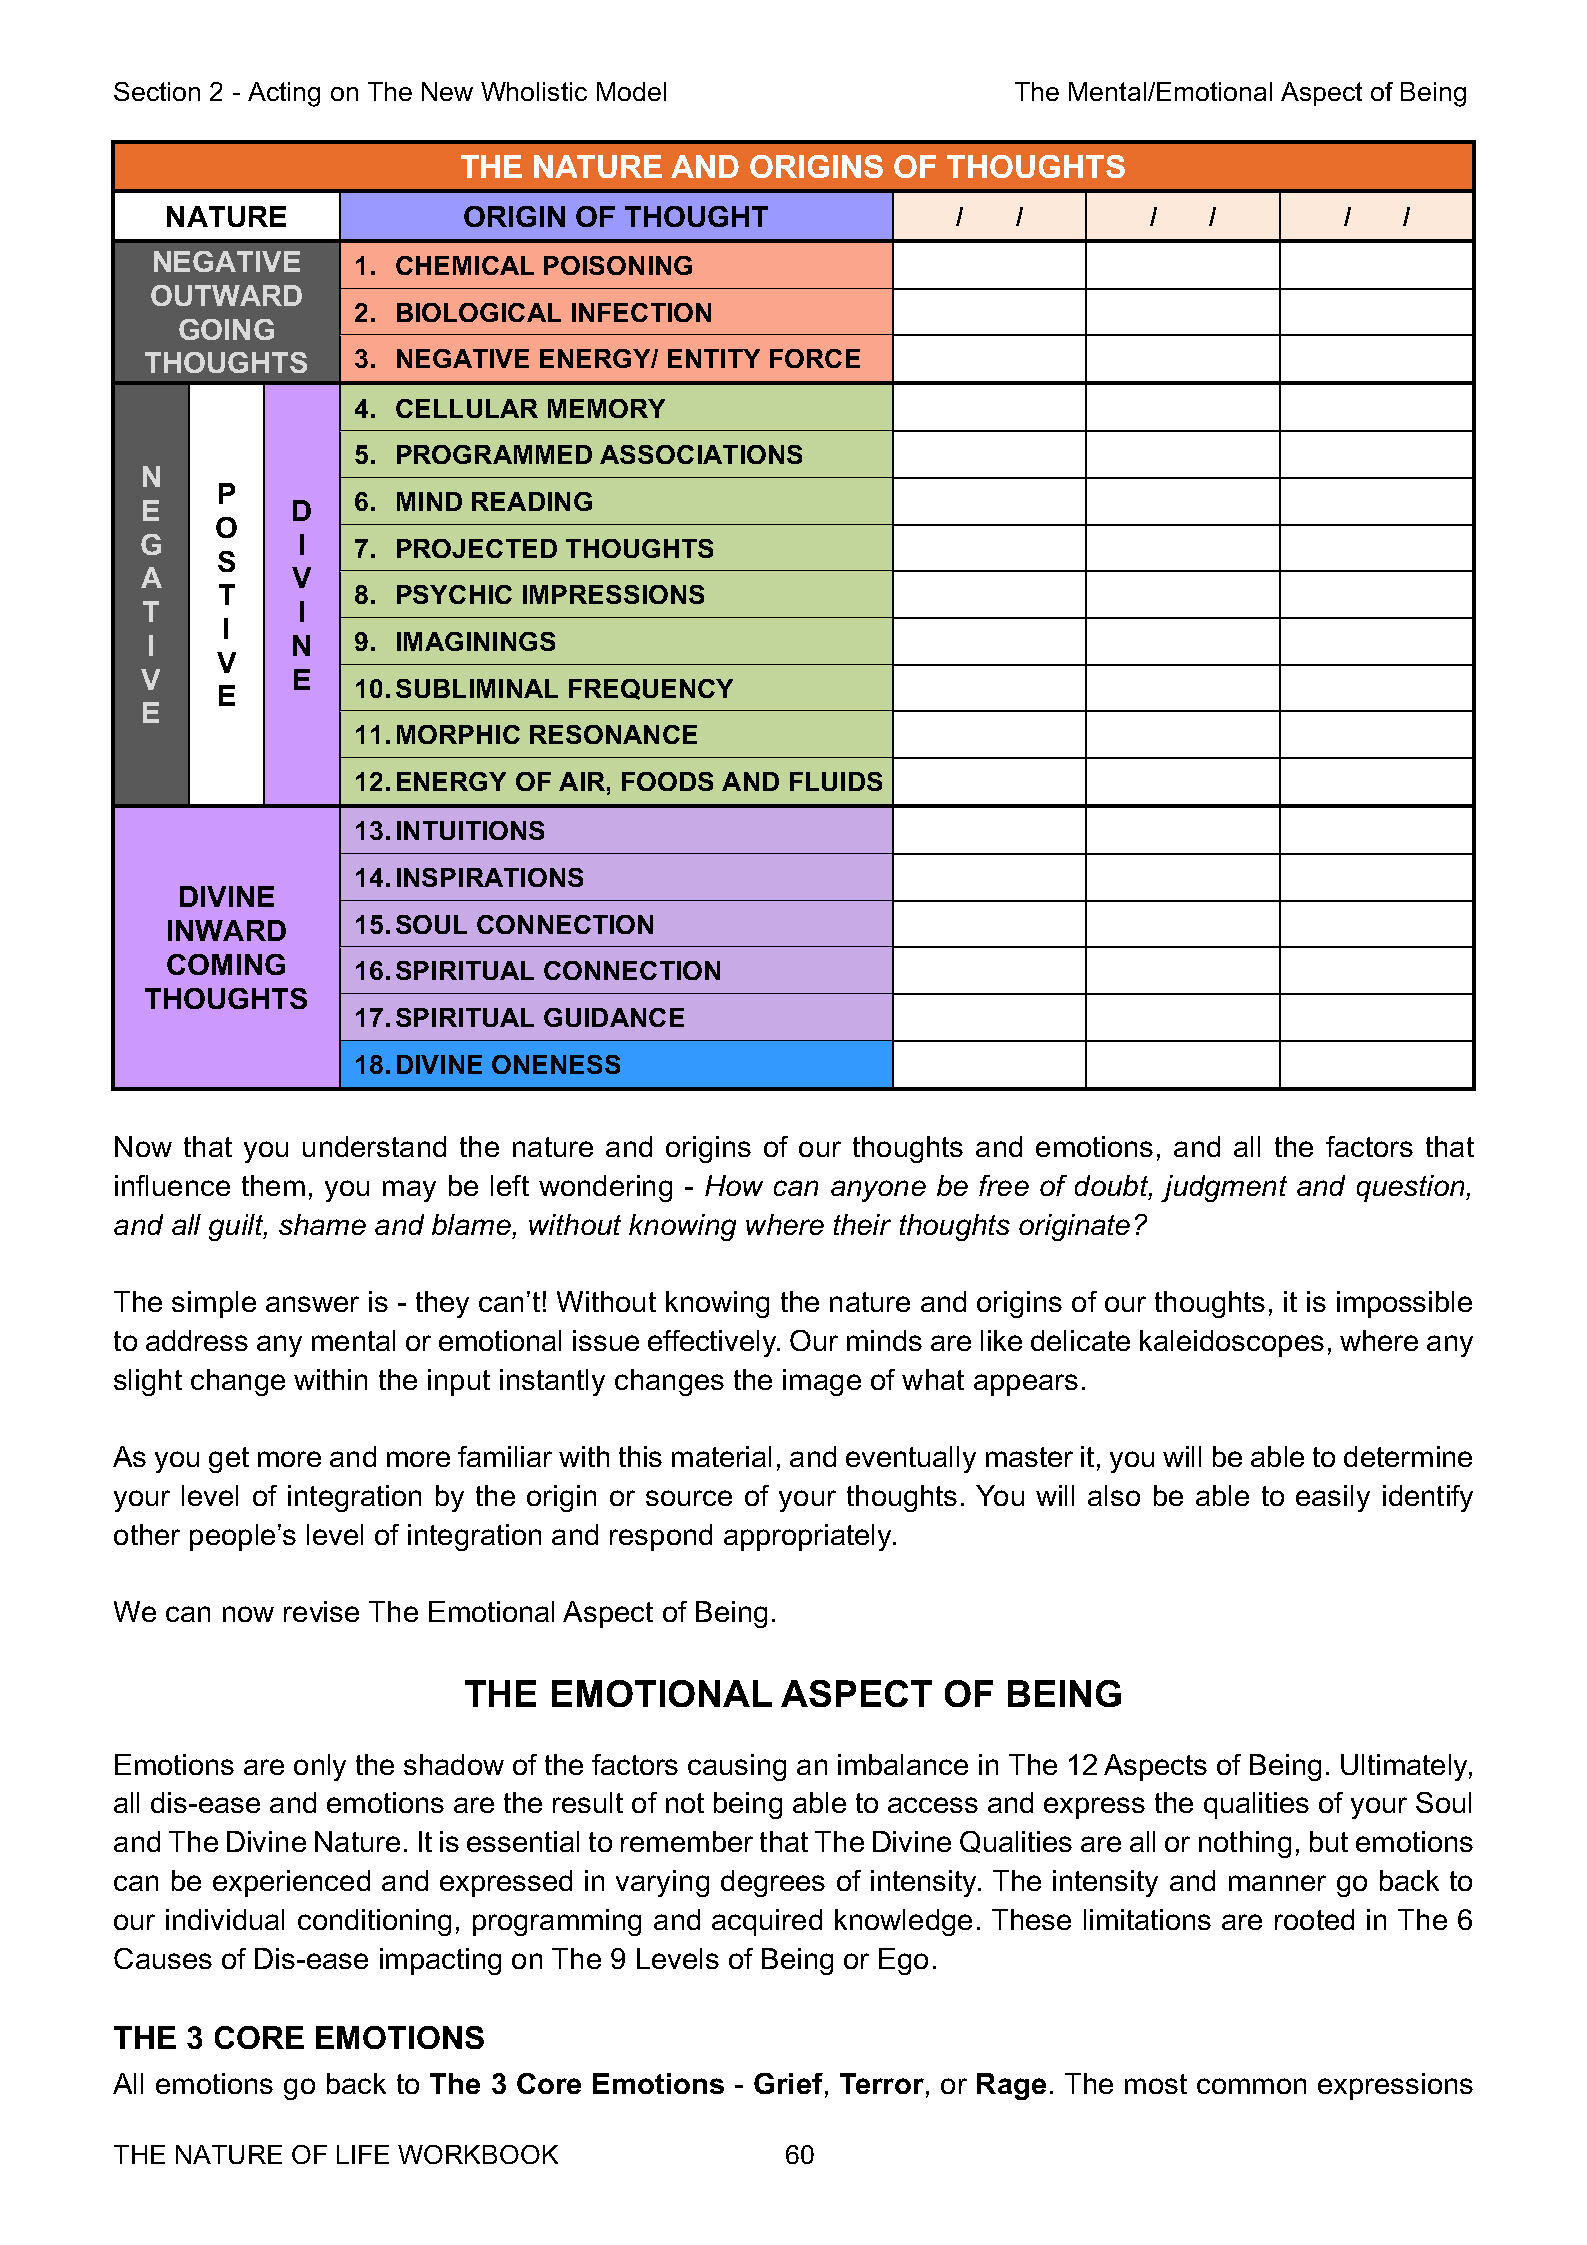 THE NATURE OF LIFE eWORKBOOK - A Profile of the Soul_Page74.jpg